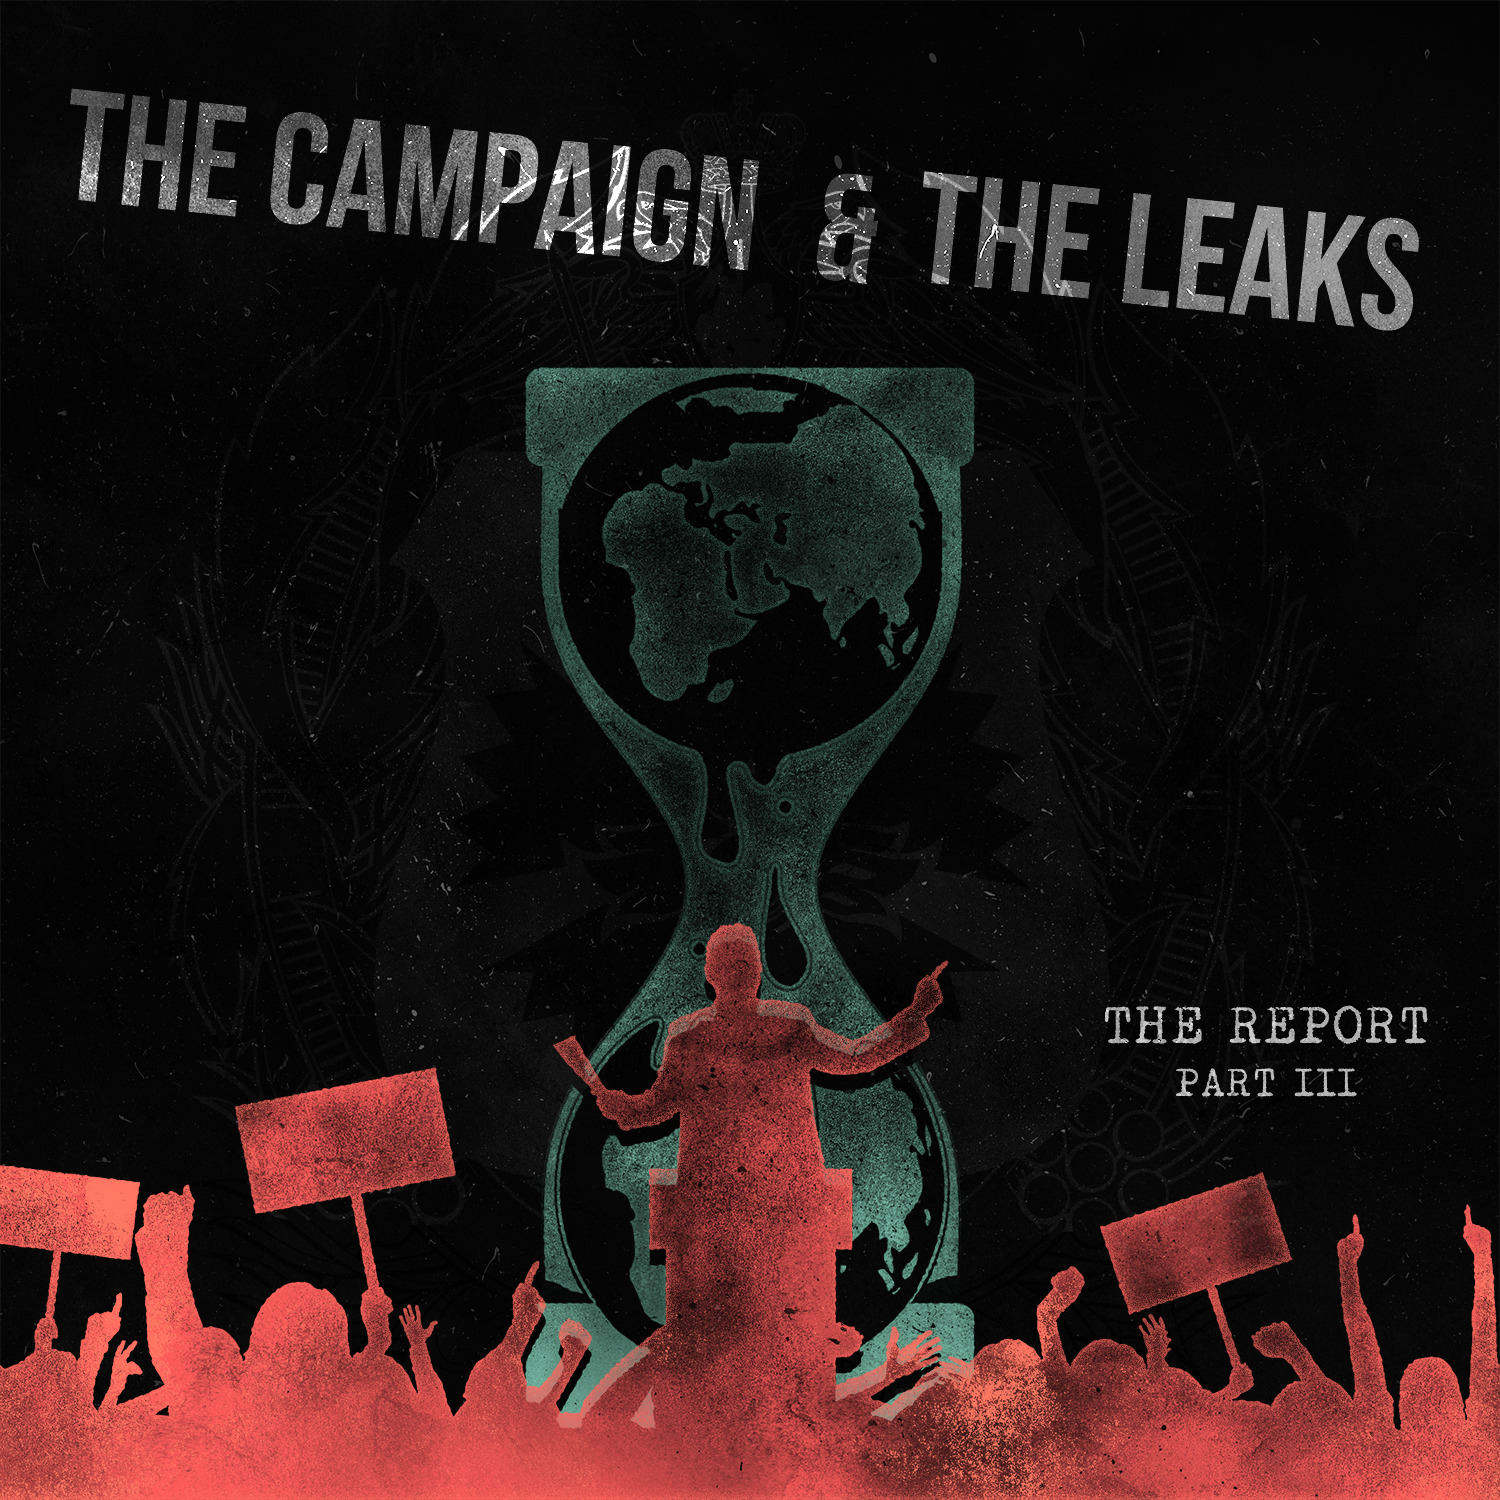 The Report Part III: The Campaign & The Leaks